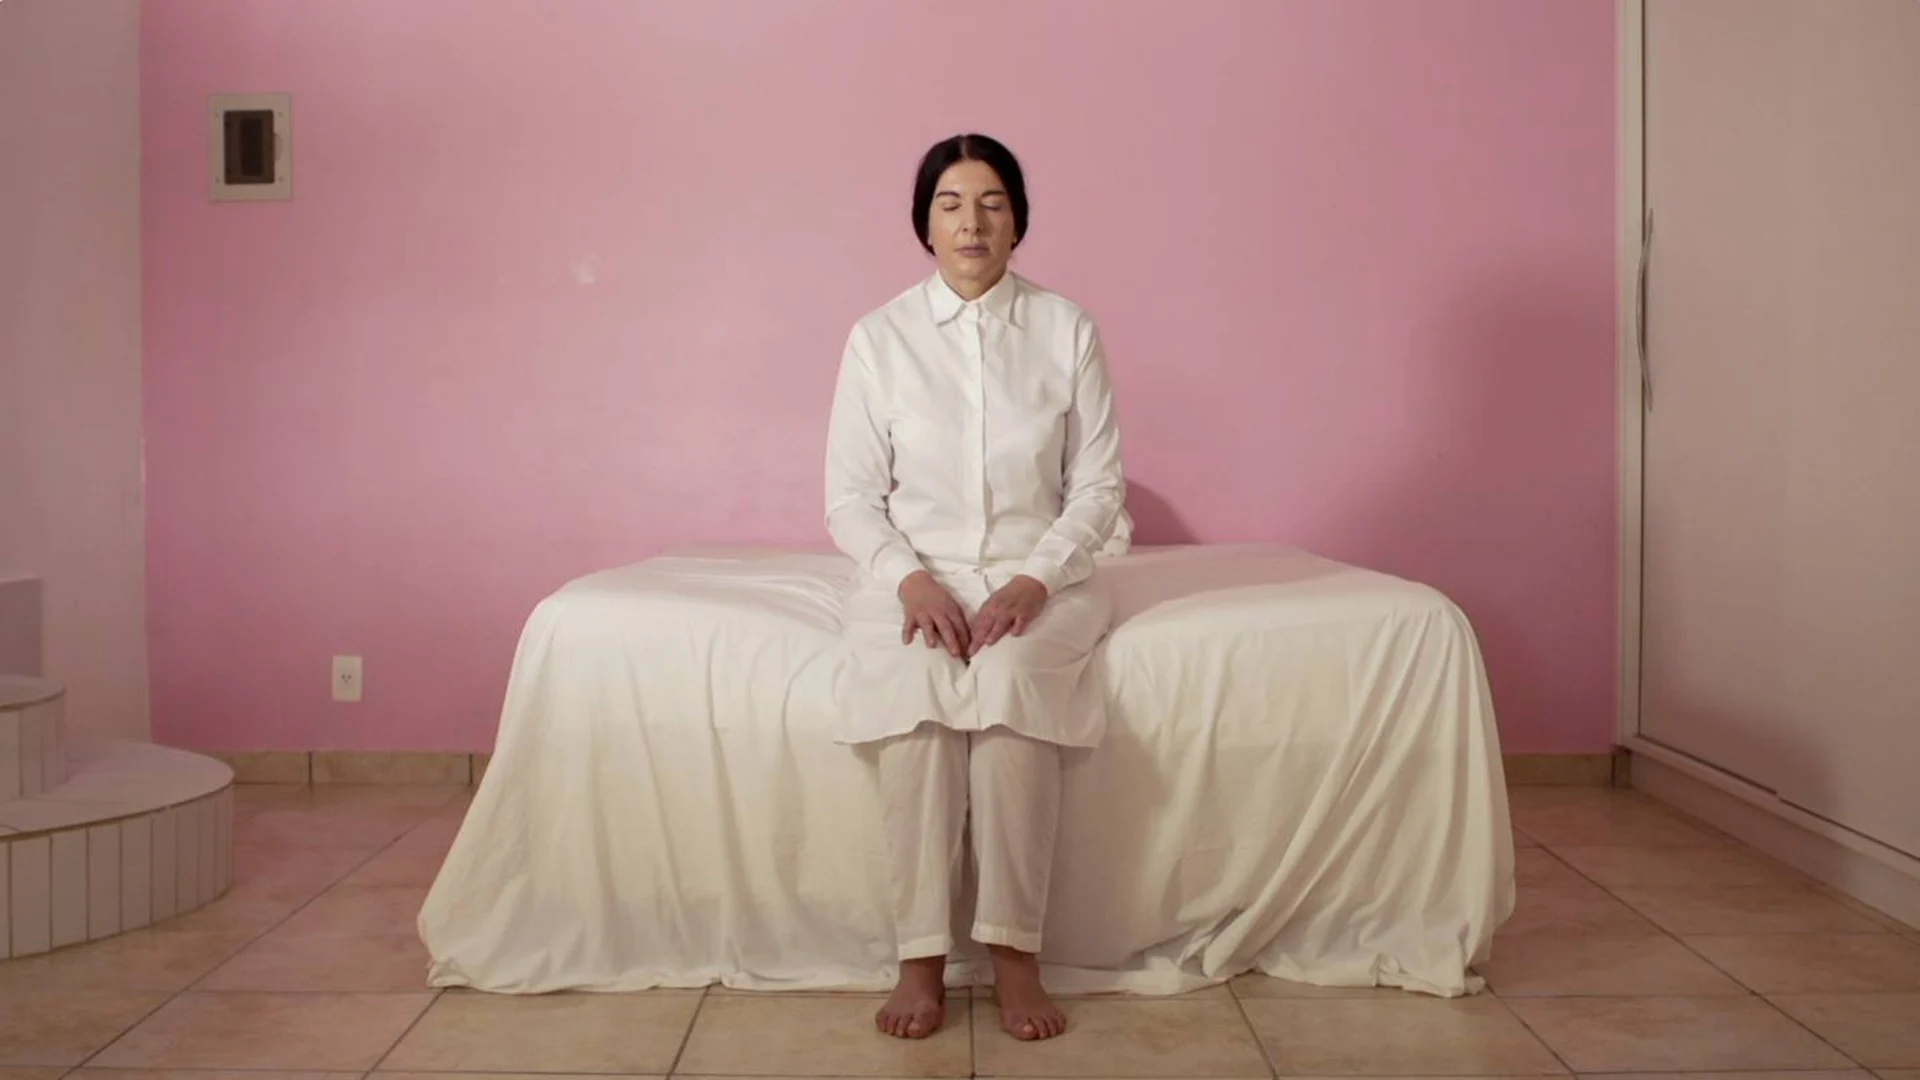 Marina Abramovic - The Space in Between